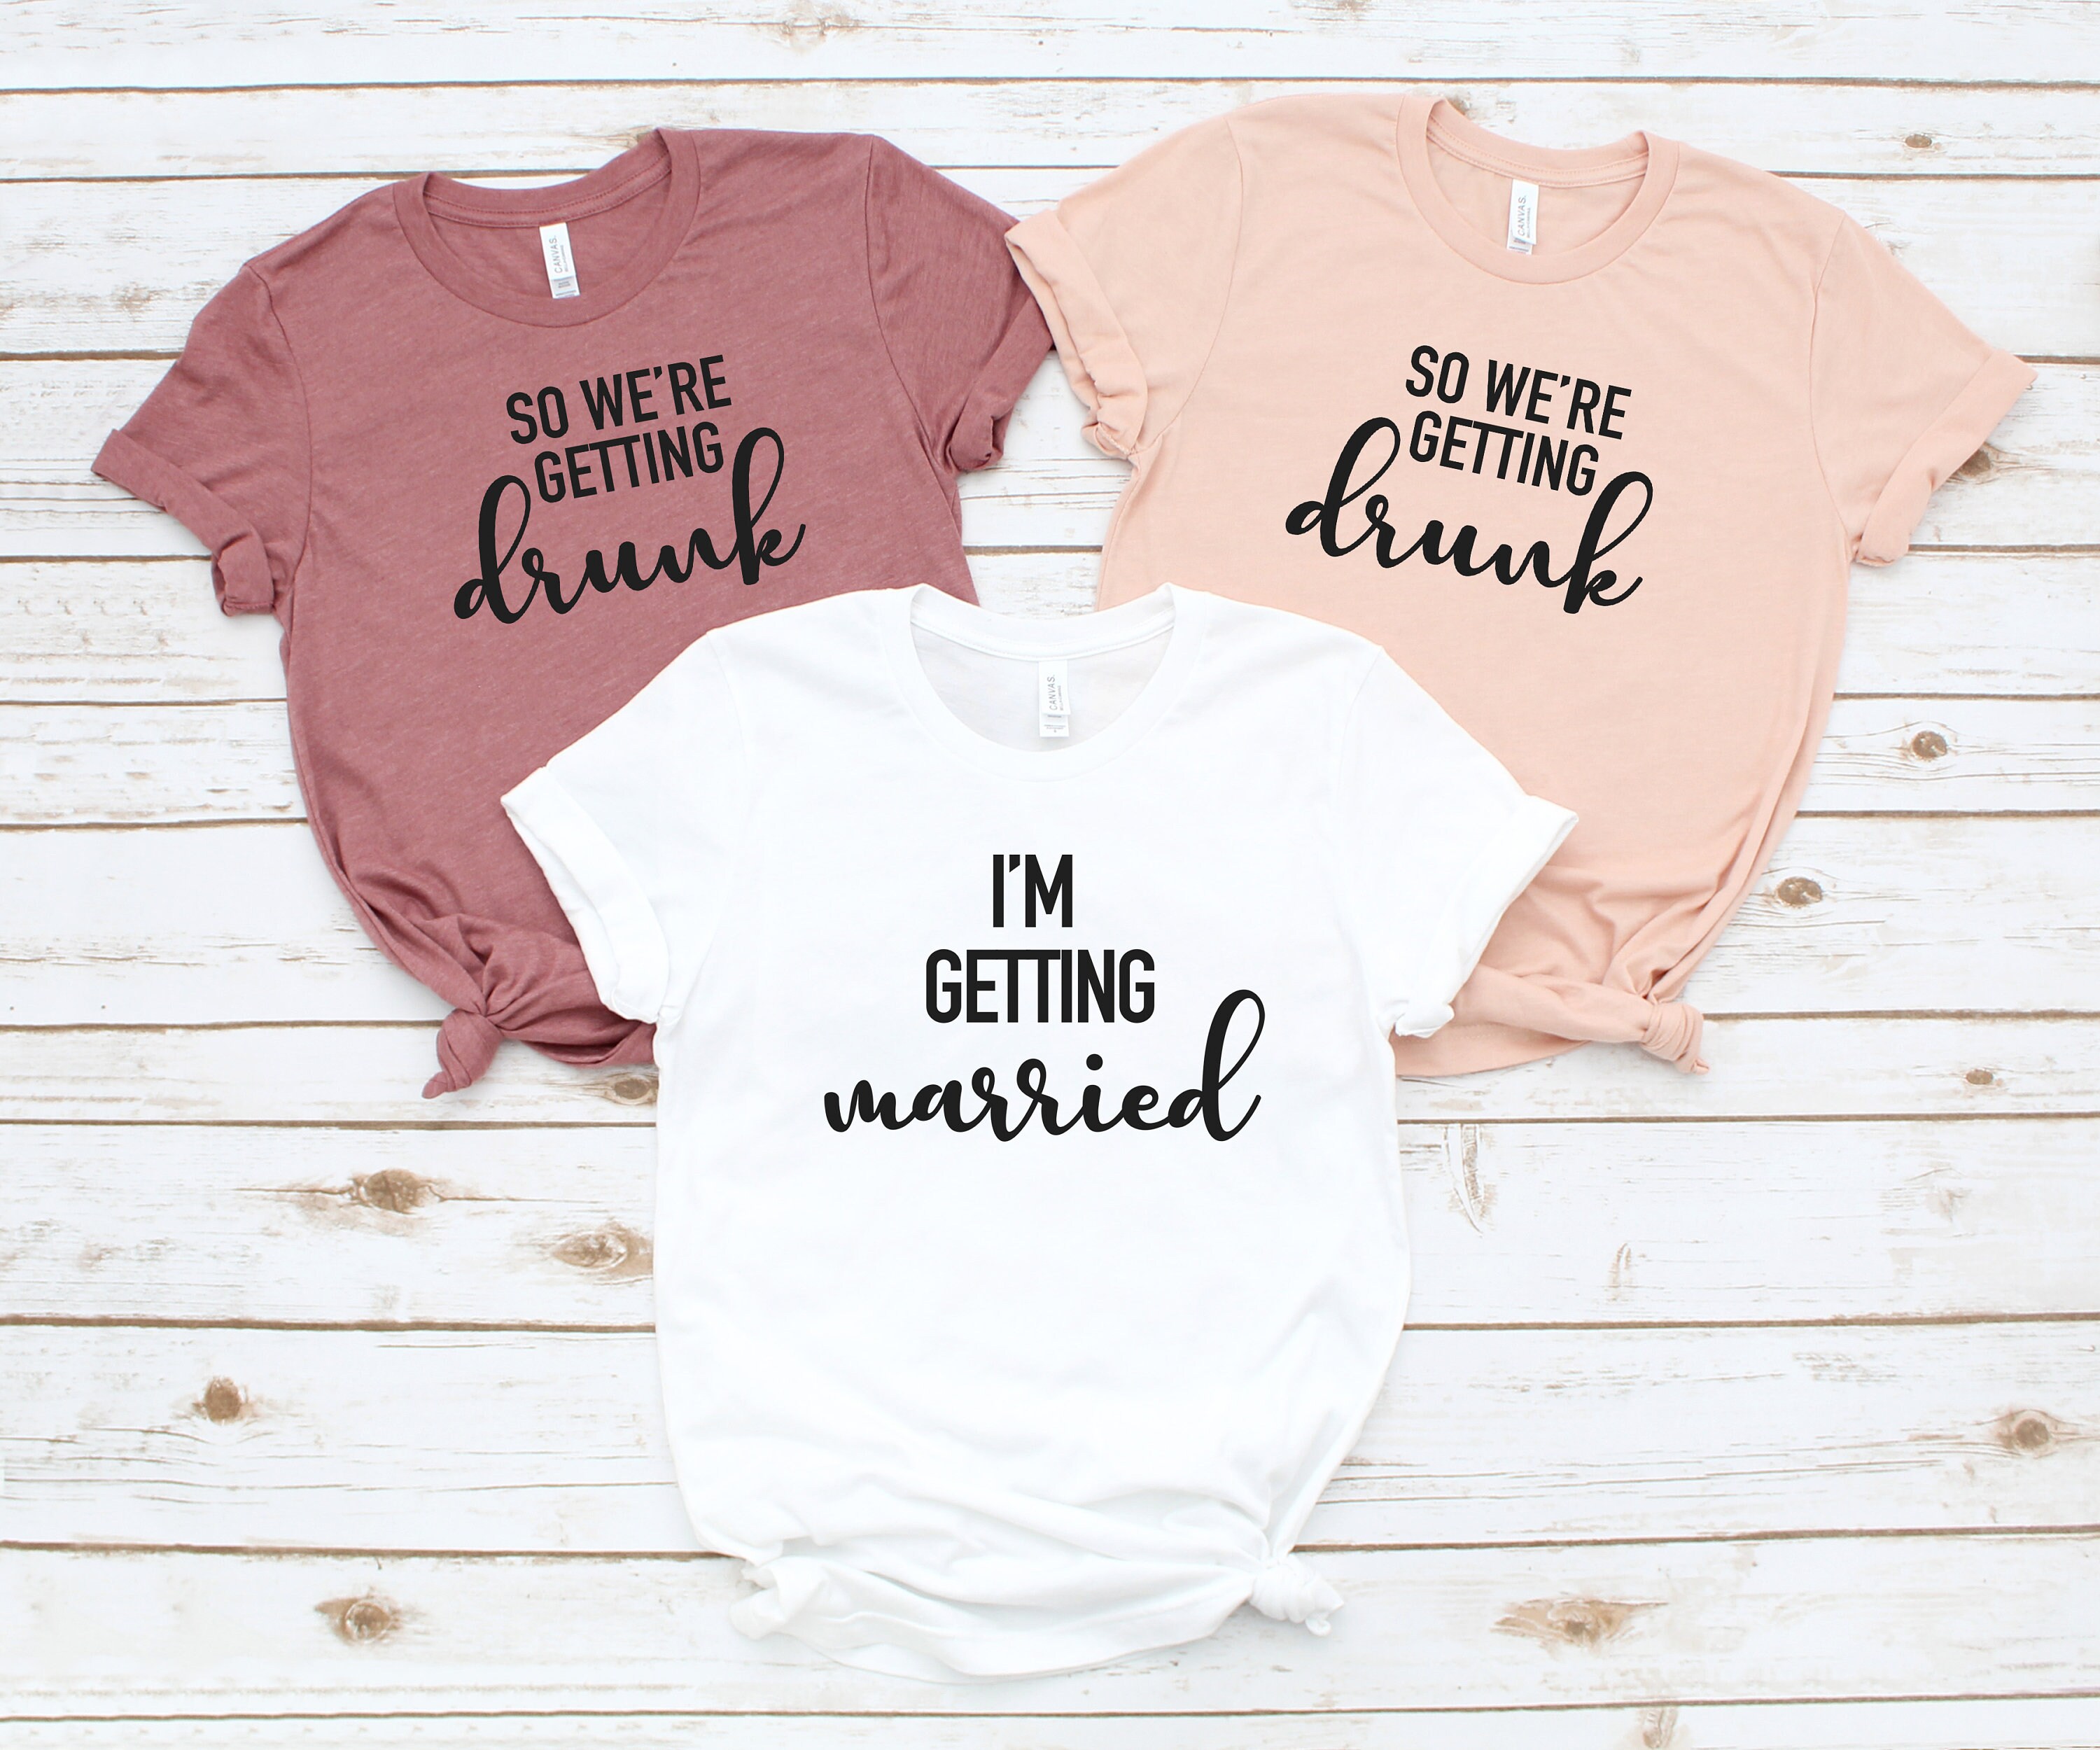 Drunk In Love Bridesmaid Just Drunk Tanks and T-Shirts We Be All Night Bride Fiance Bachelorette Party Shirts -Feyonce